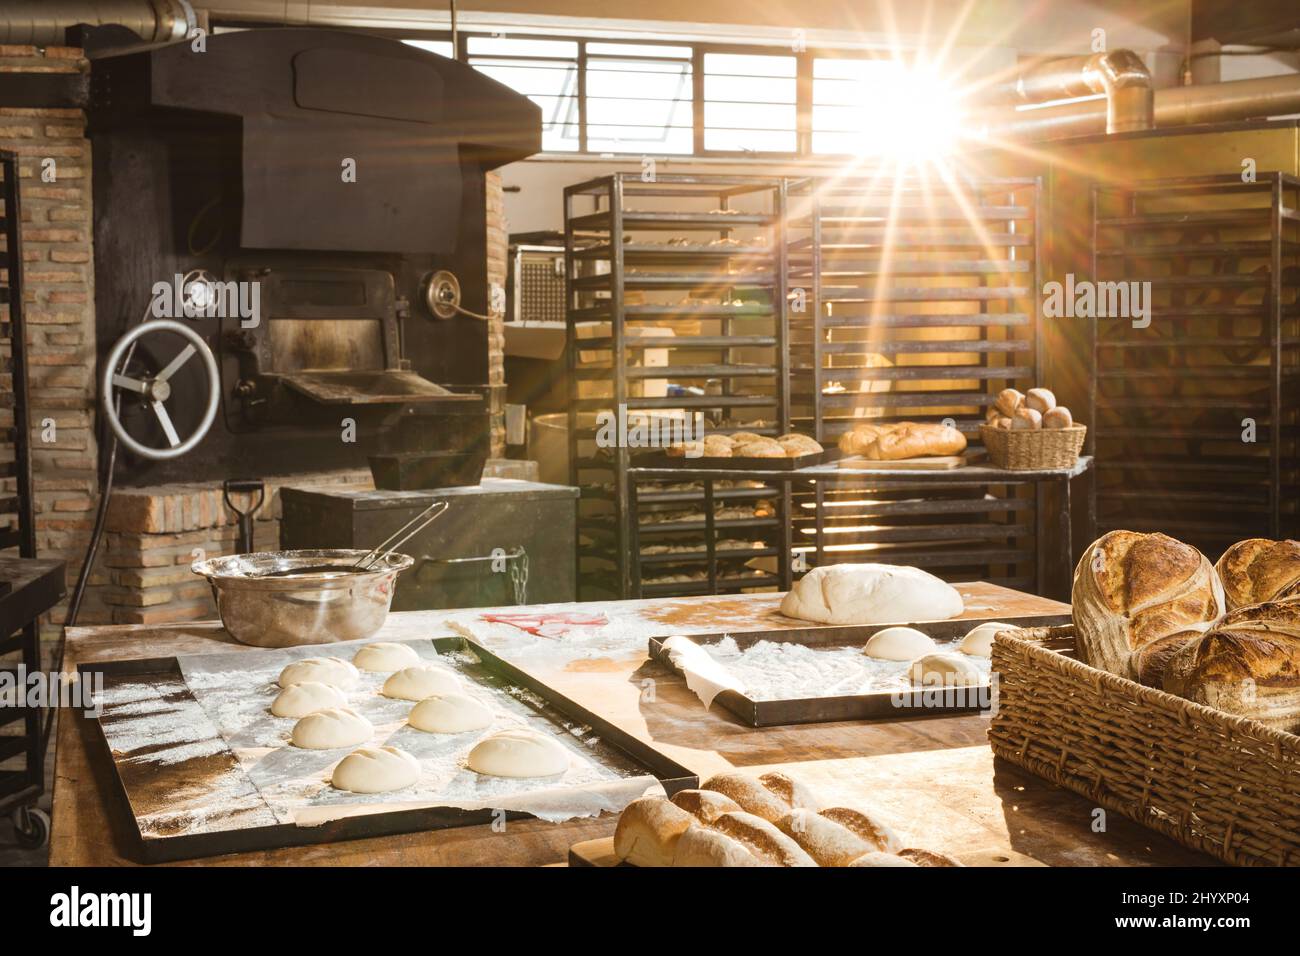 Interior of bakery with back lit emitting from window Stock Photo